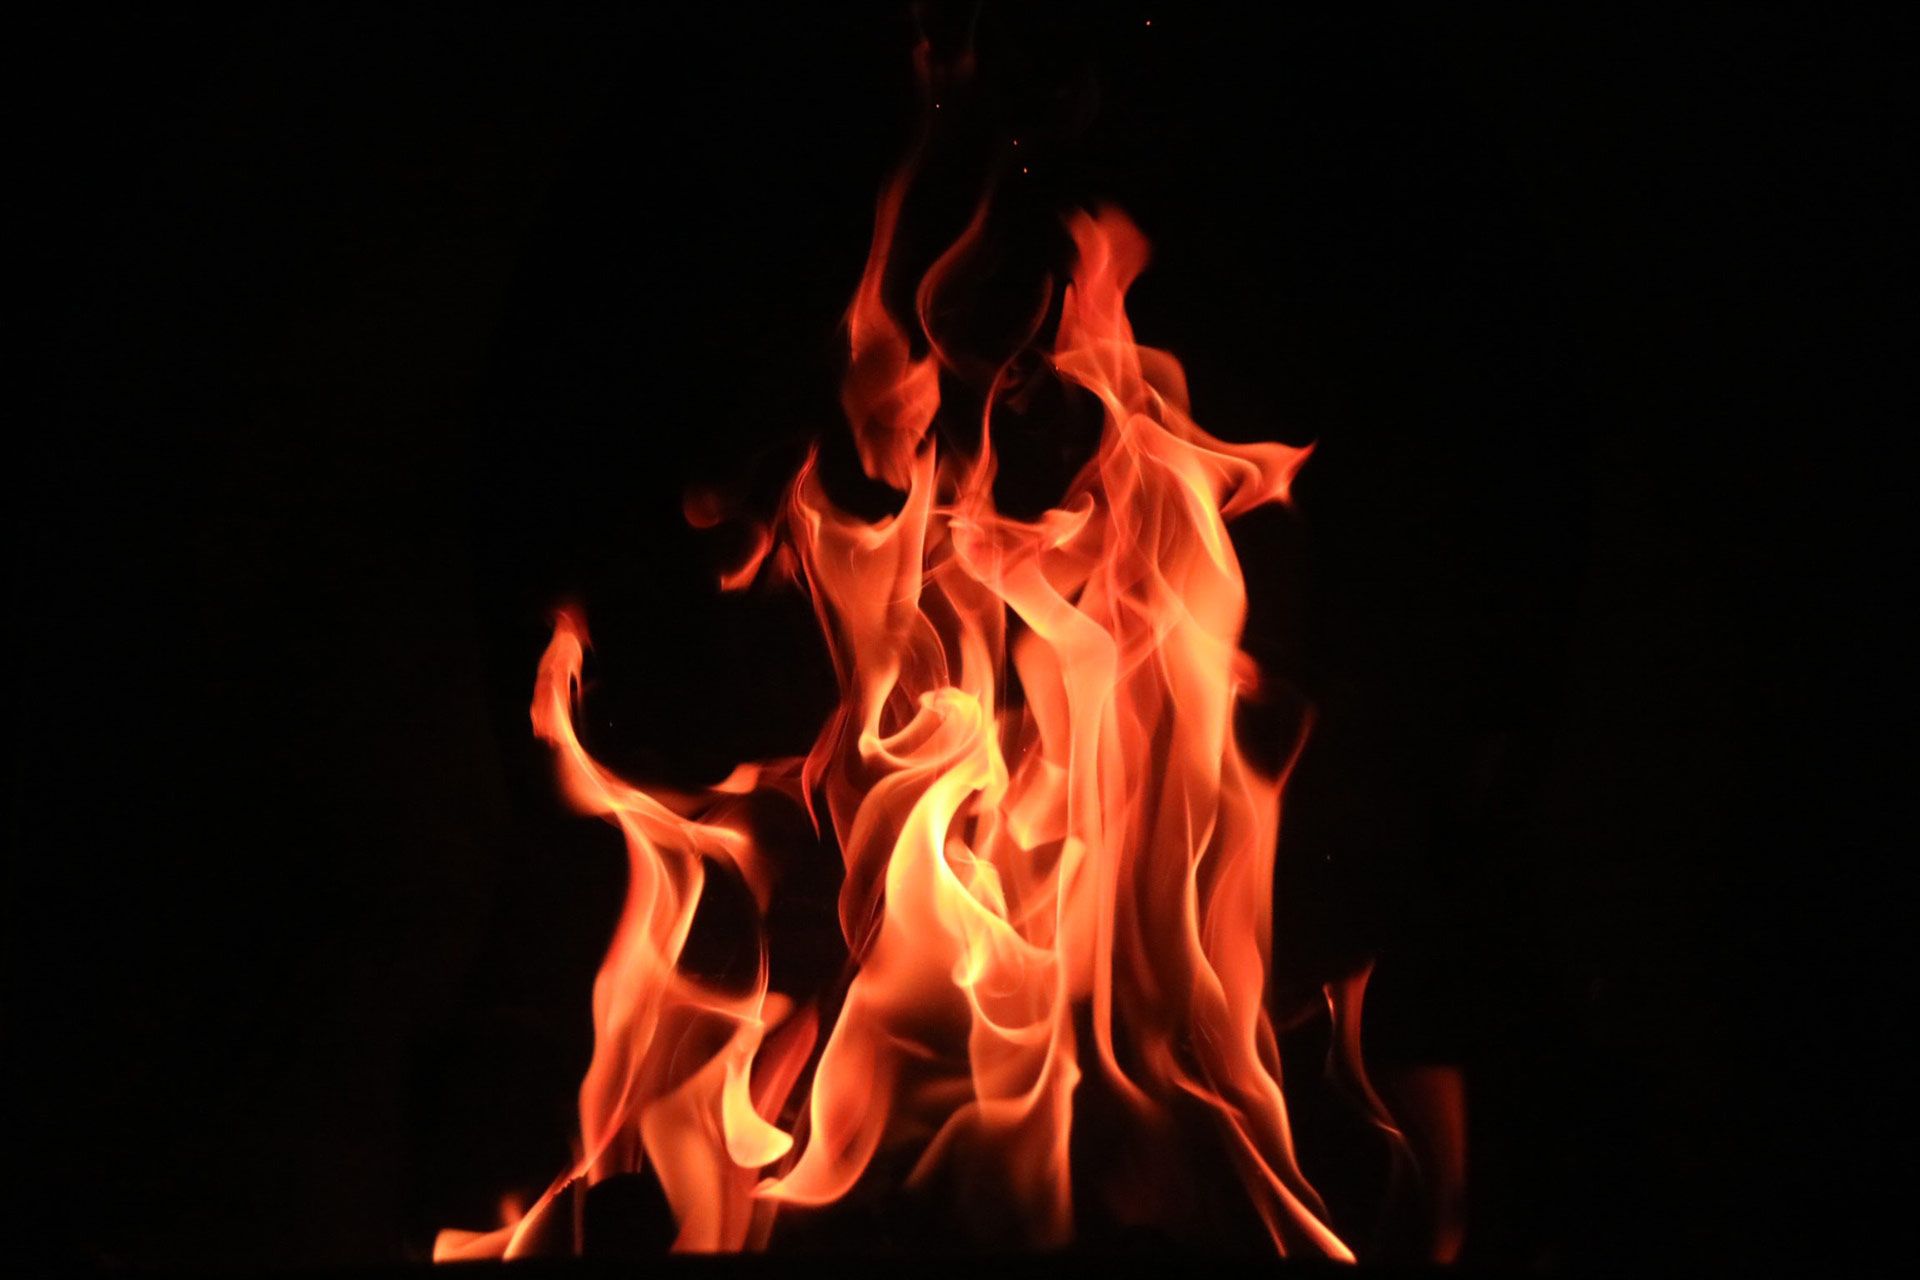 Just a picture of fire